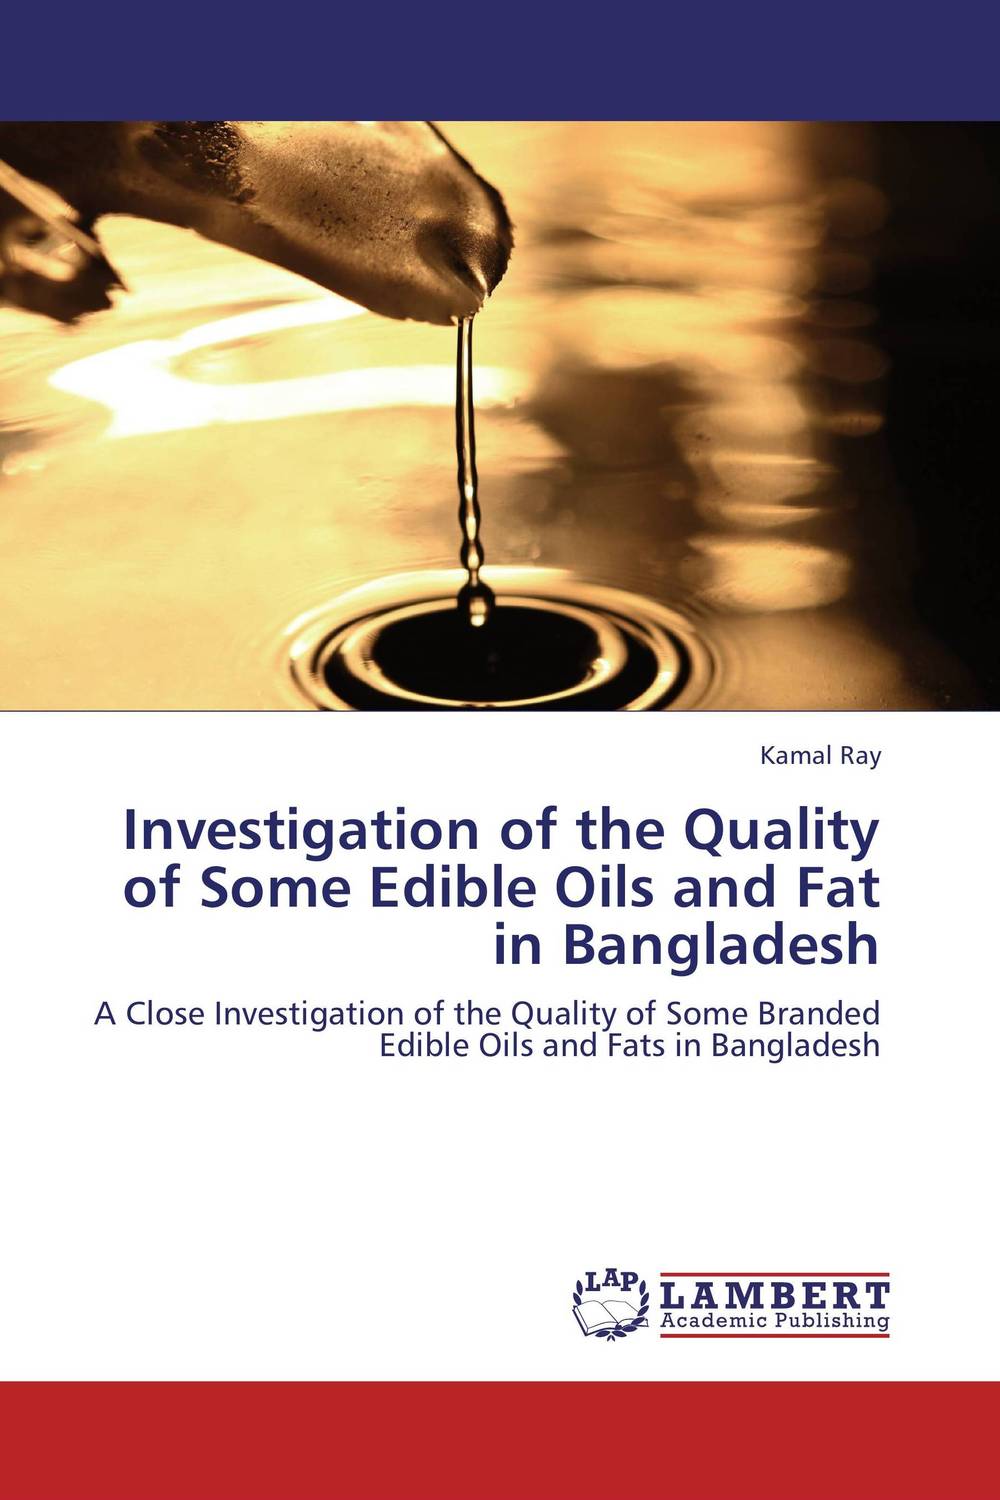 Investigation of the Quality of Some Edible Oils and Fat in Bangladesh